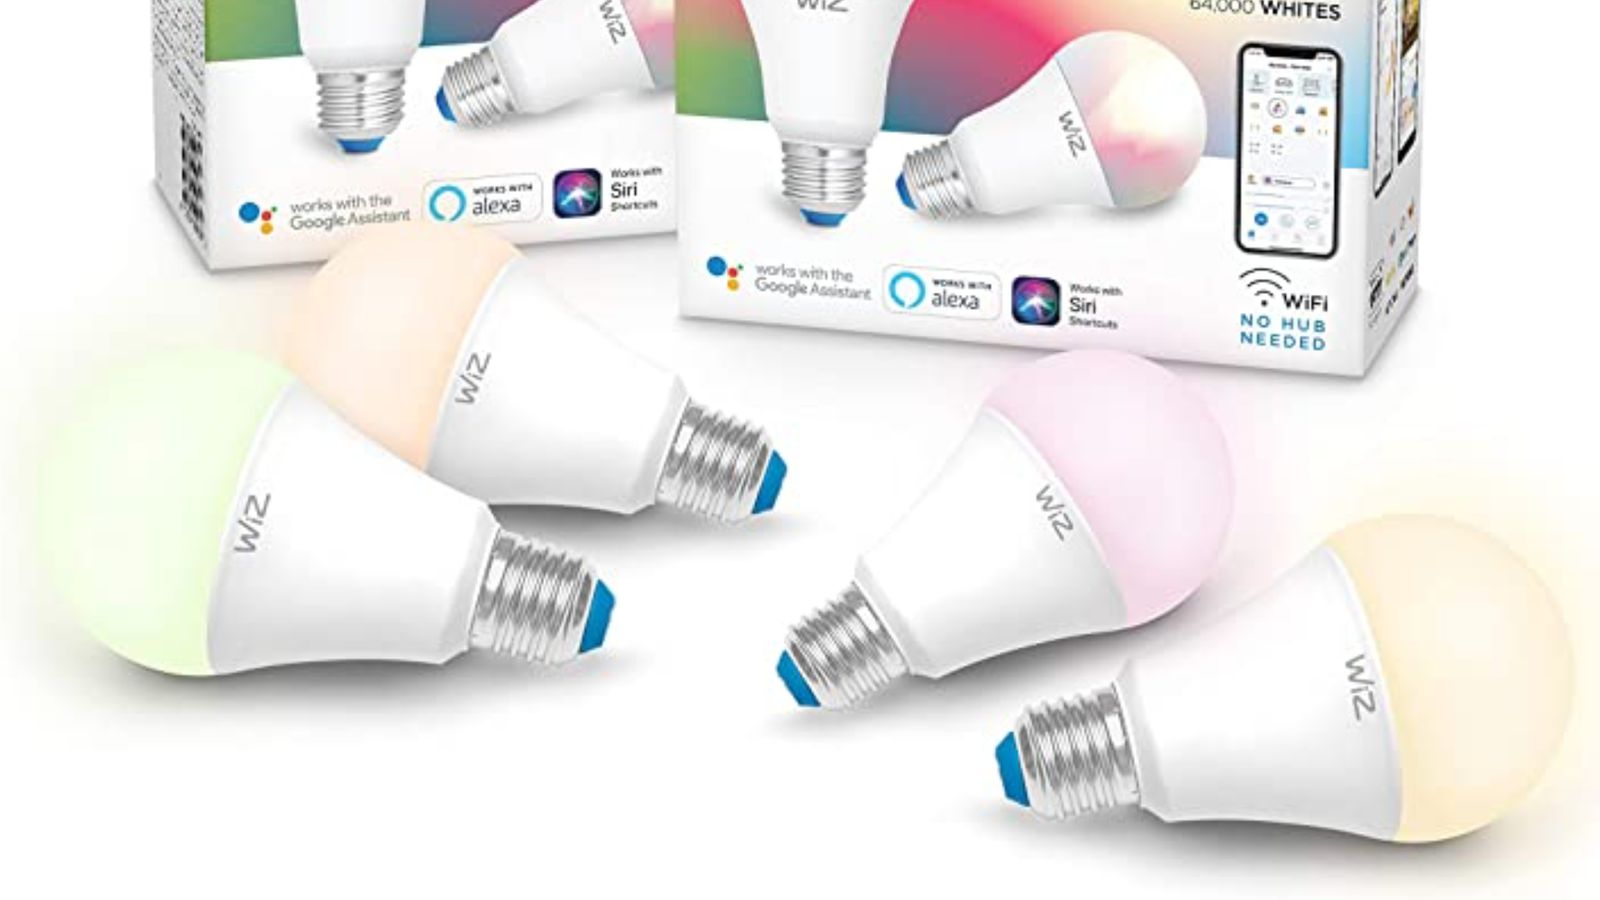 Philips Hue vs WiZ: which smart lights are right for your home